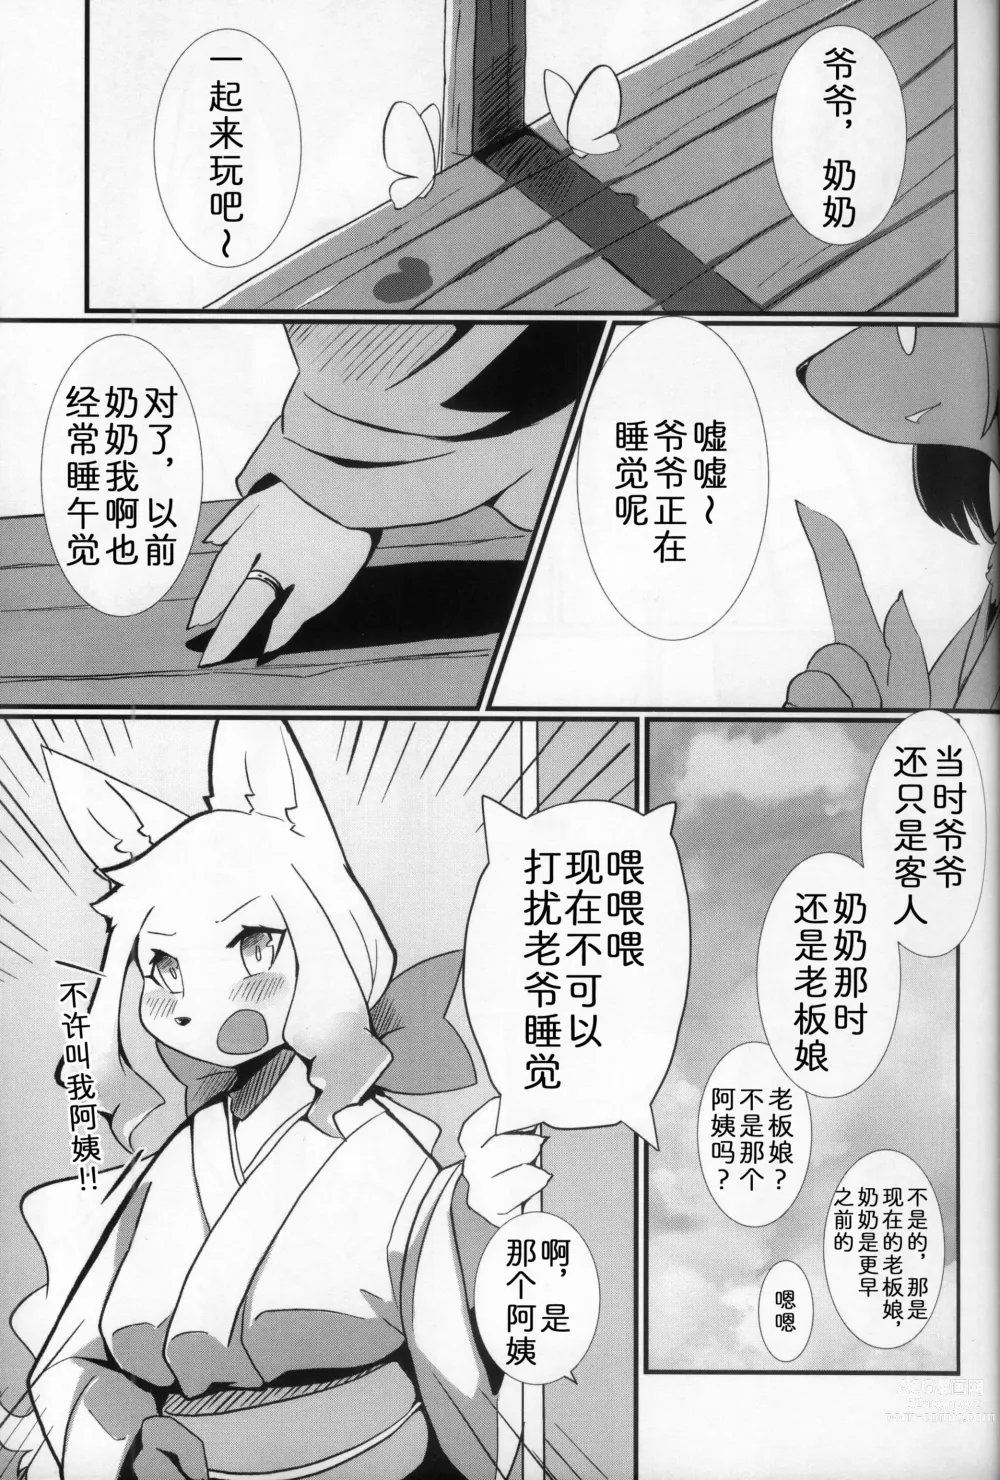 Page 3 of doujinshi 七彩之蝶